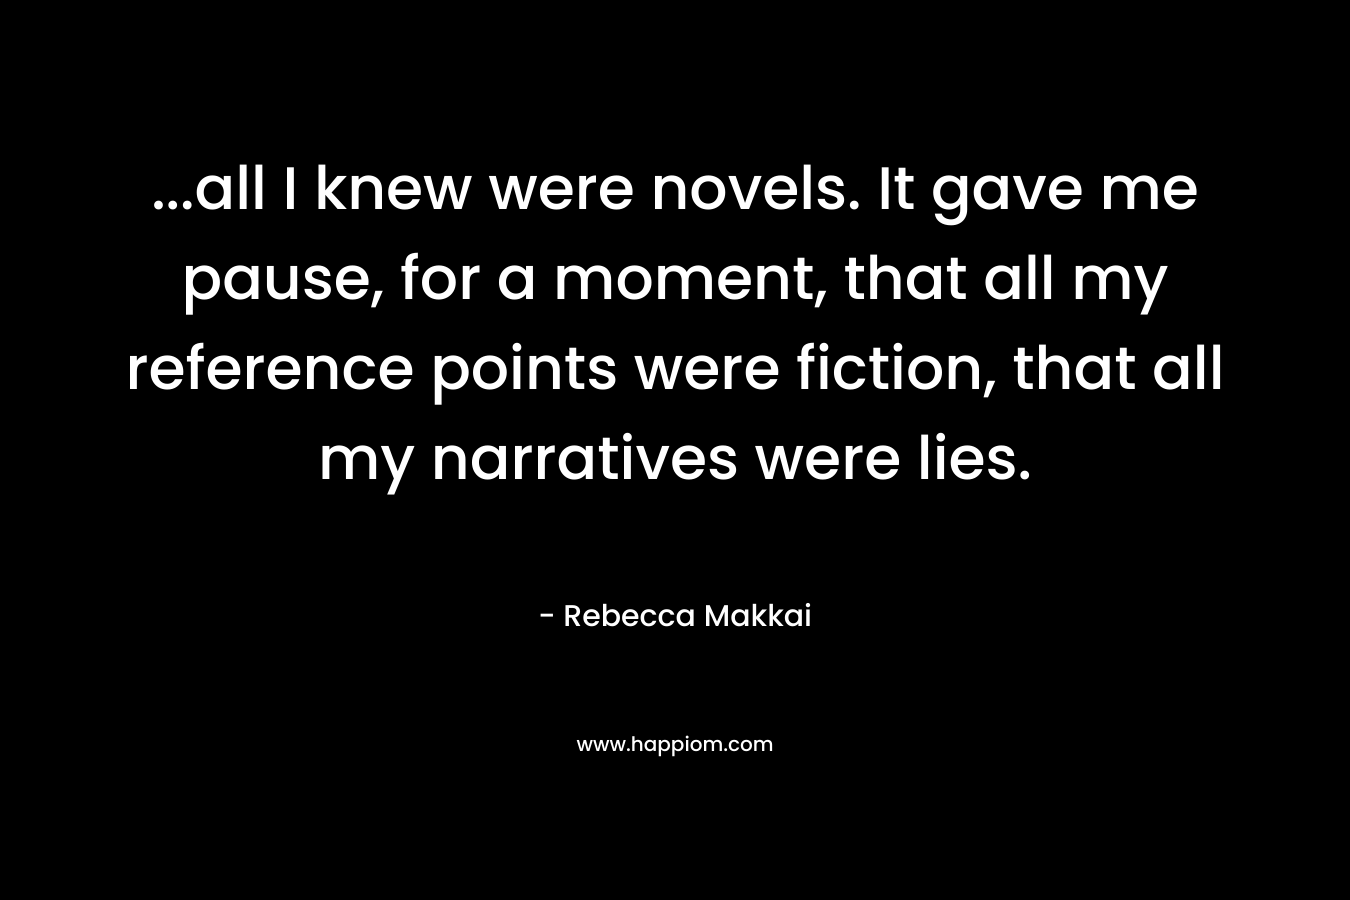 ...all I knew were novels. It gave me pause, for a moment, that all my reference points were fiction, that all my narratives were lies.